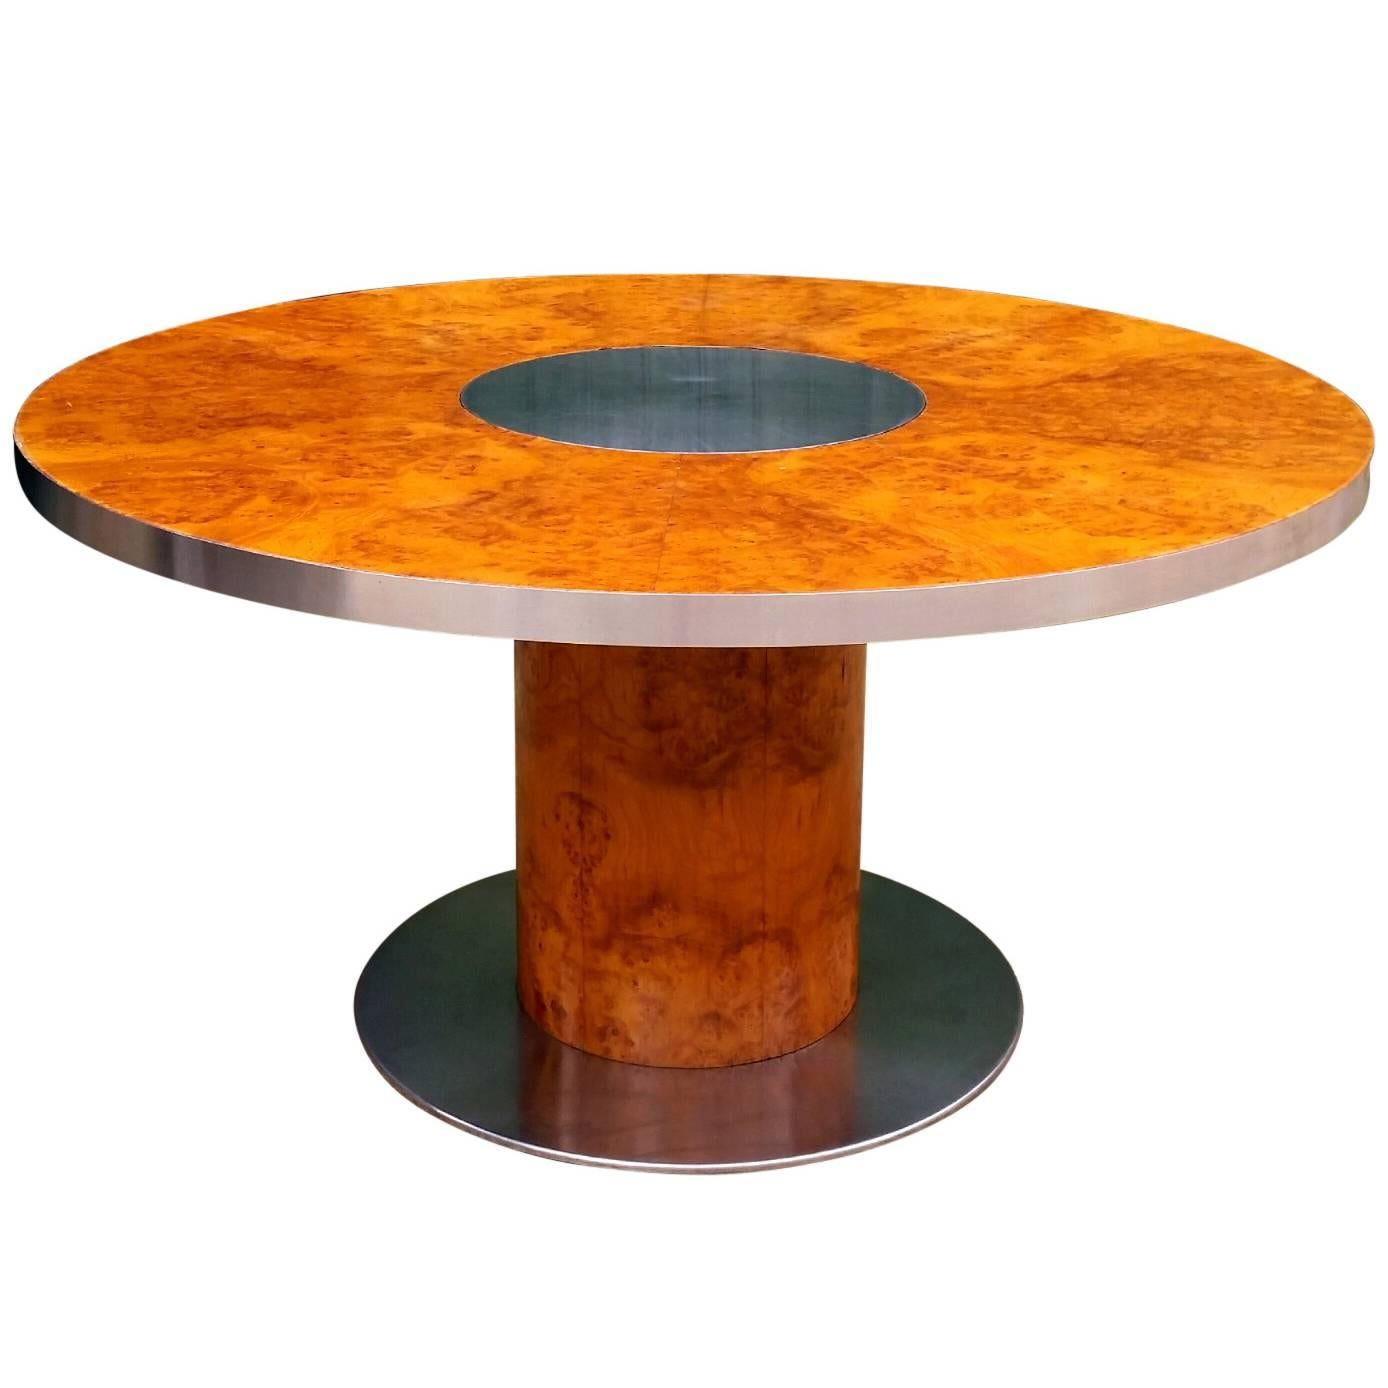 Willy Rizzo Dining Table model "Savage" for Mario Sabot, circa 1970